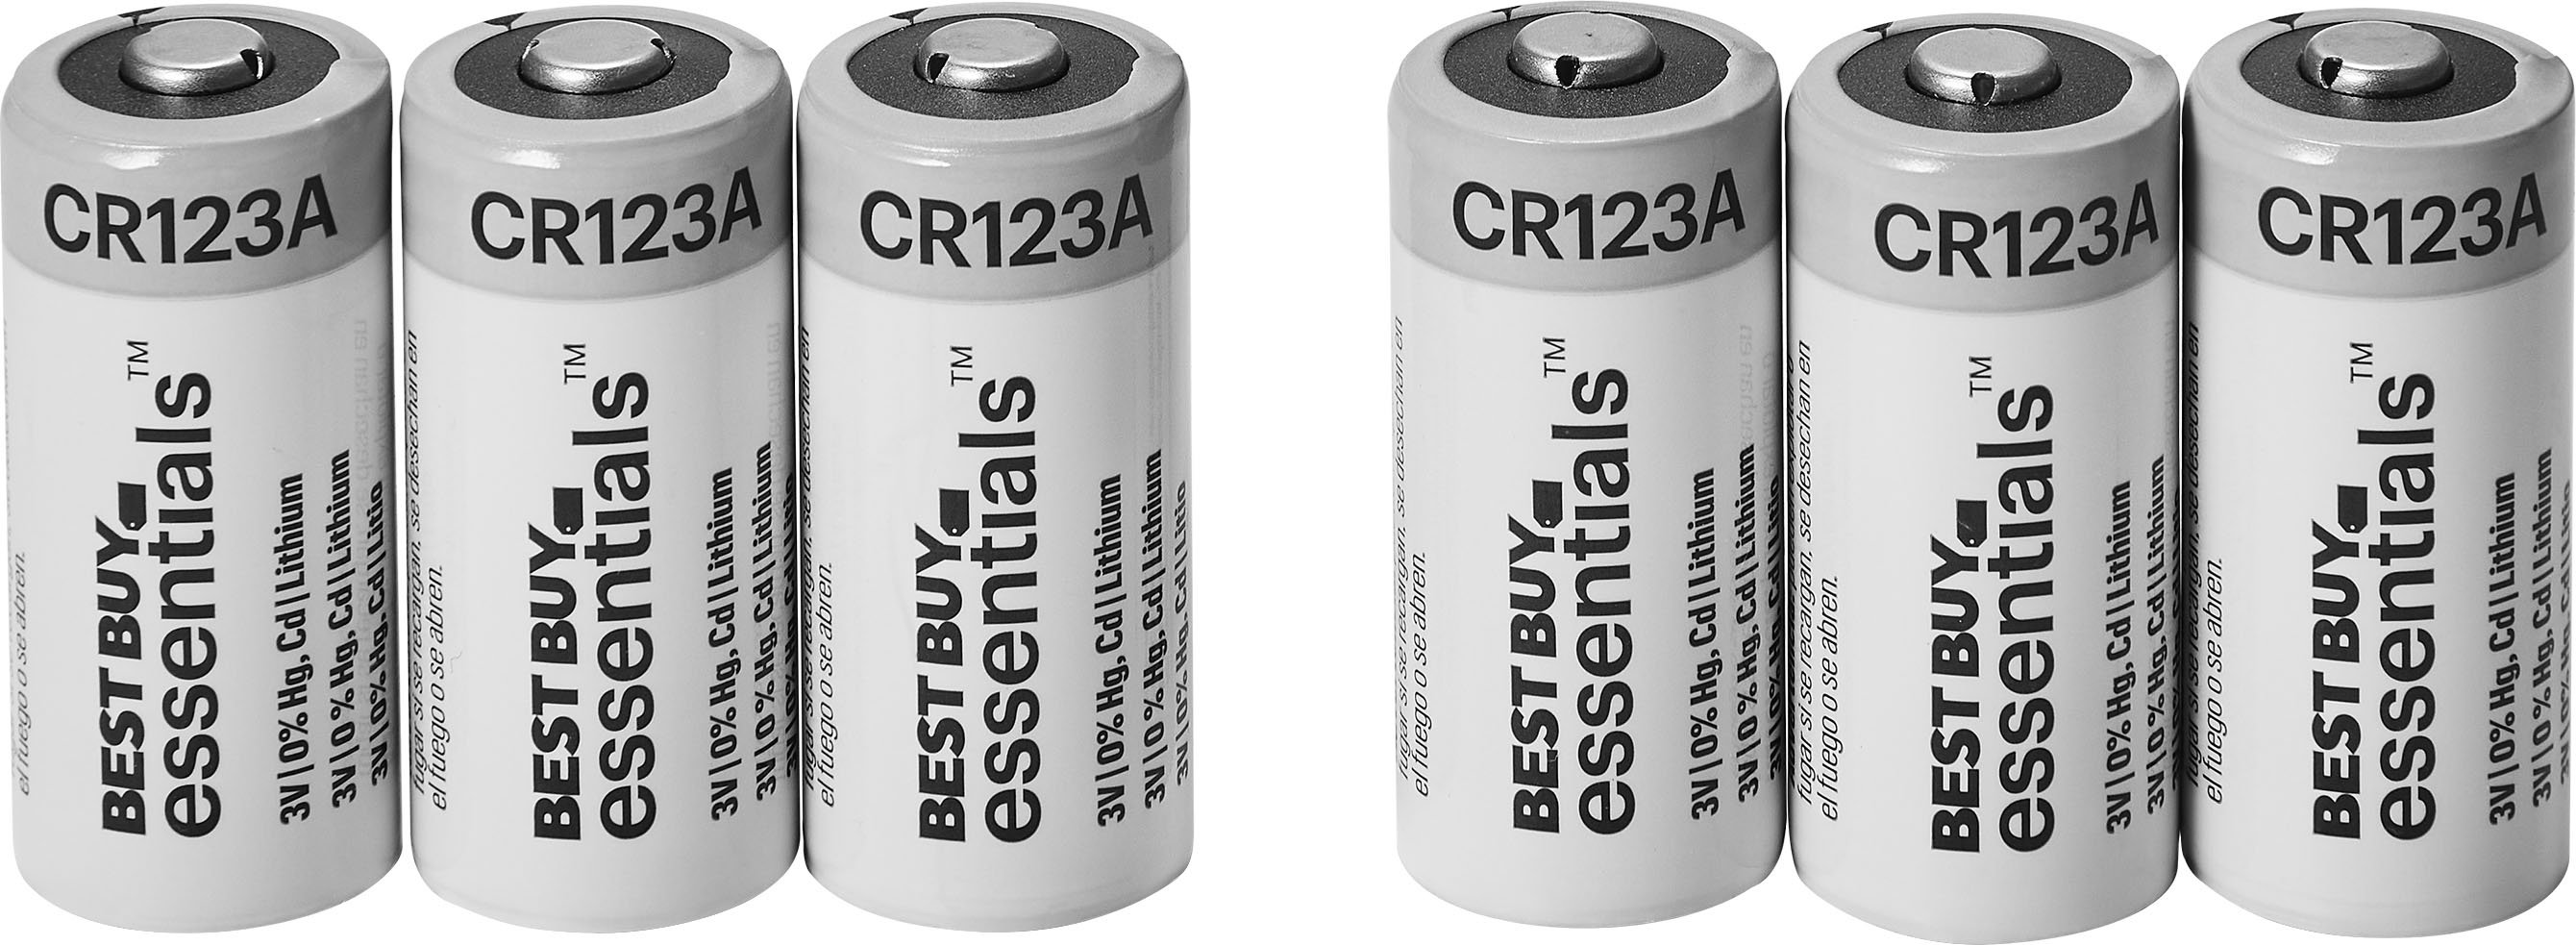 CR 123A Continental Battery Systems, Battery Products